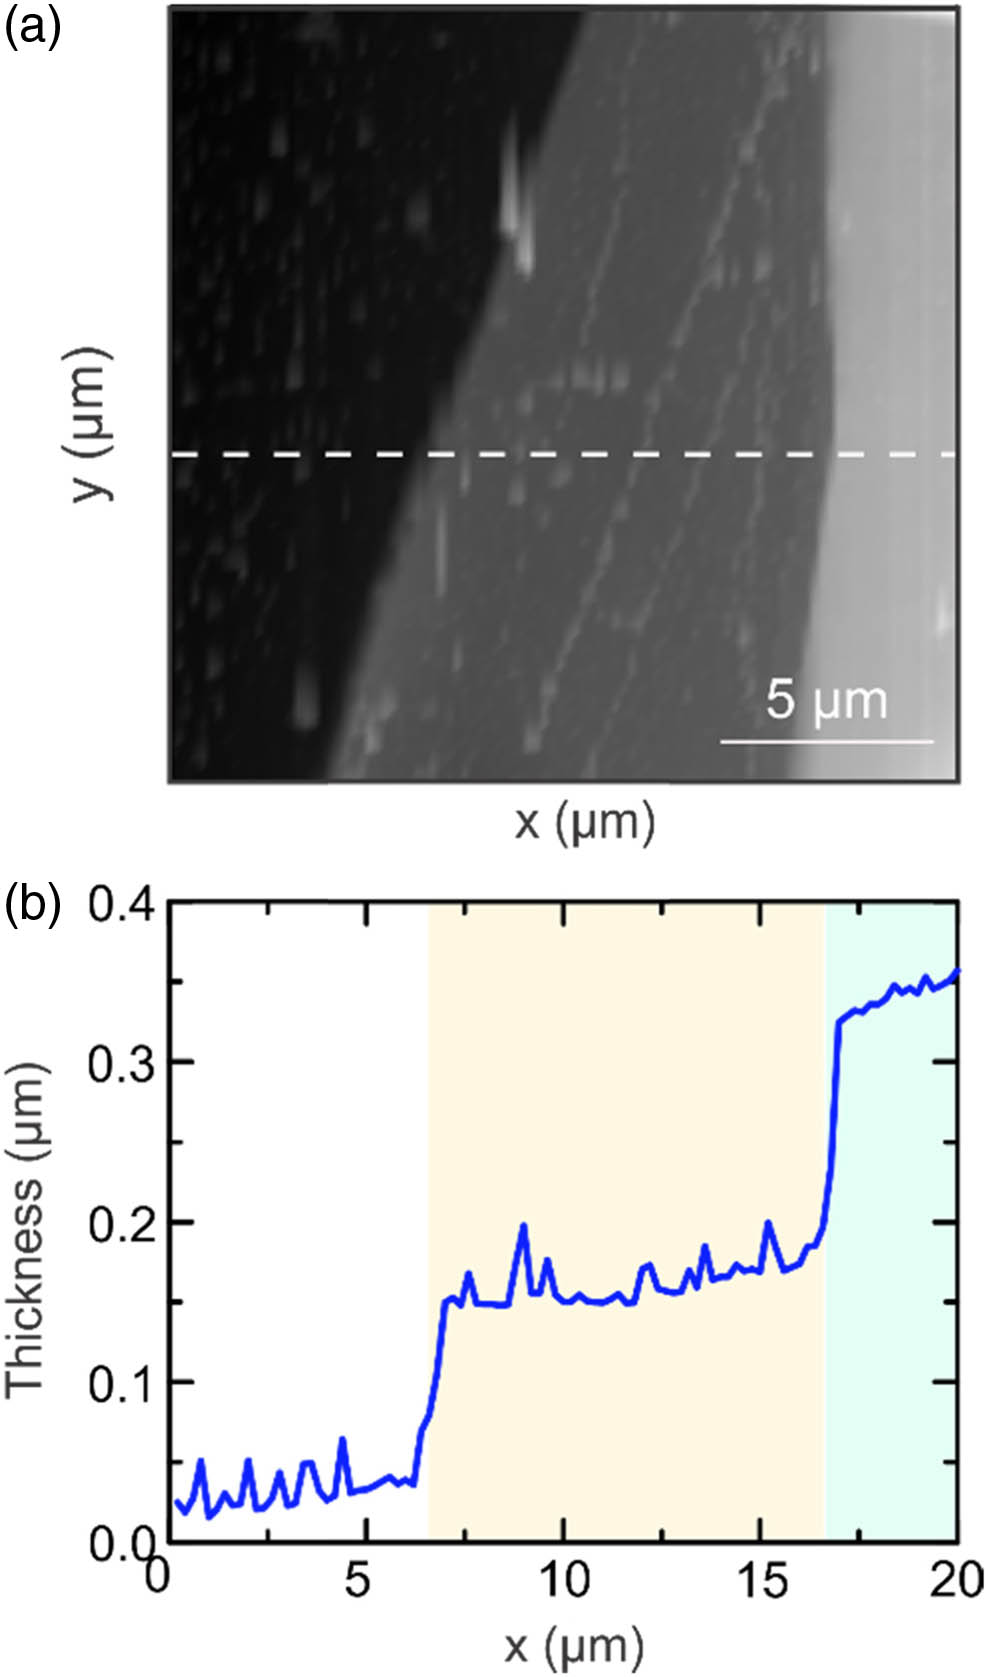 (a) Atomic force microscope (AFM) image of the MoS2 flake for the region of interest. (b) Cross section of the MoS2 flake along the white line in (a).